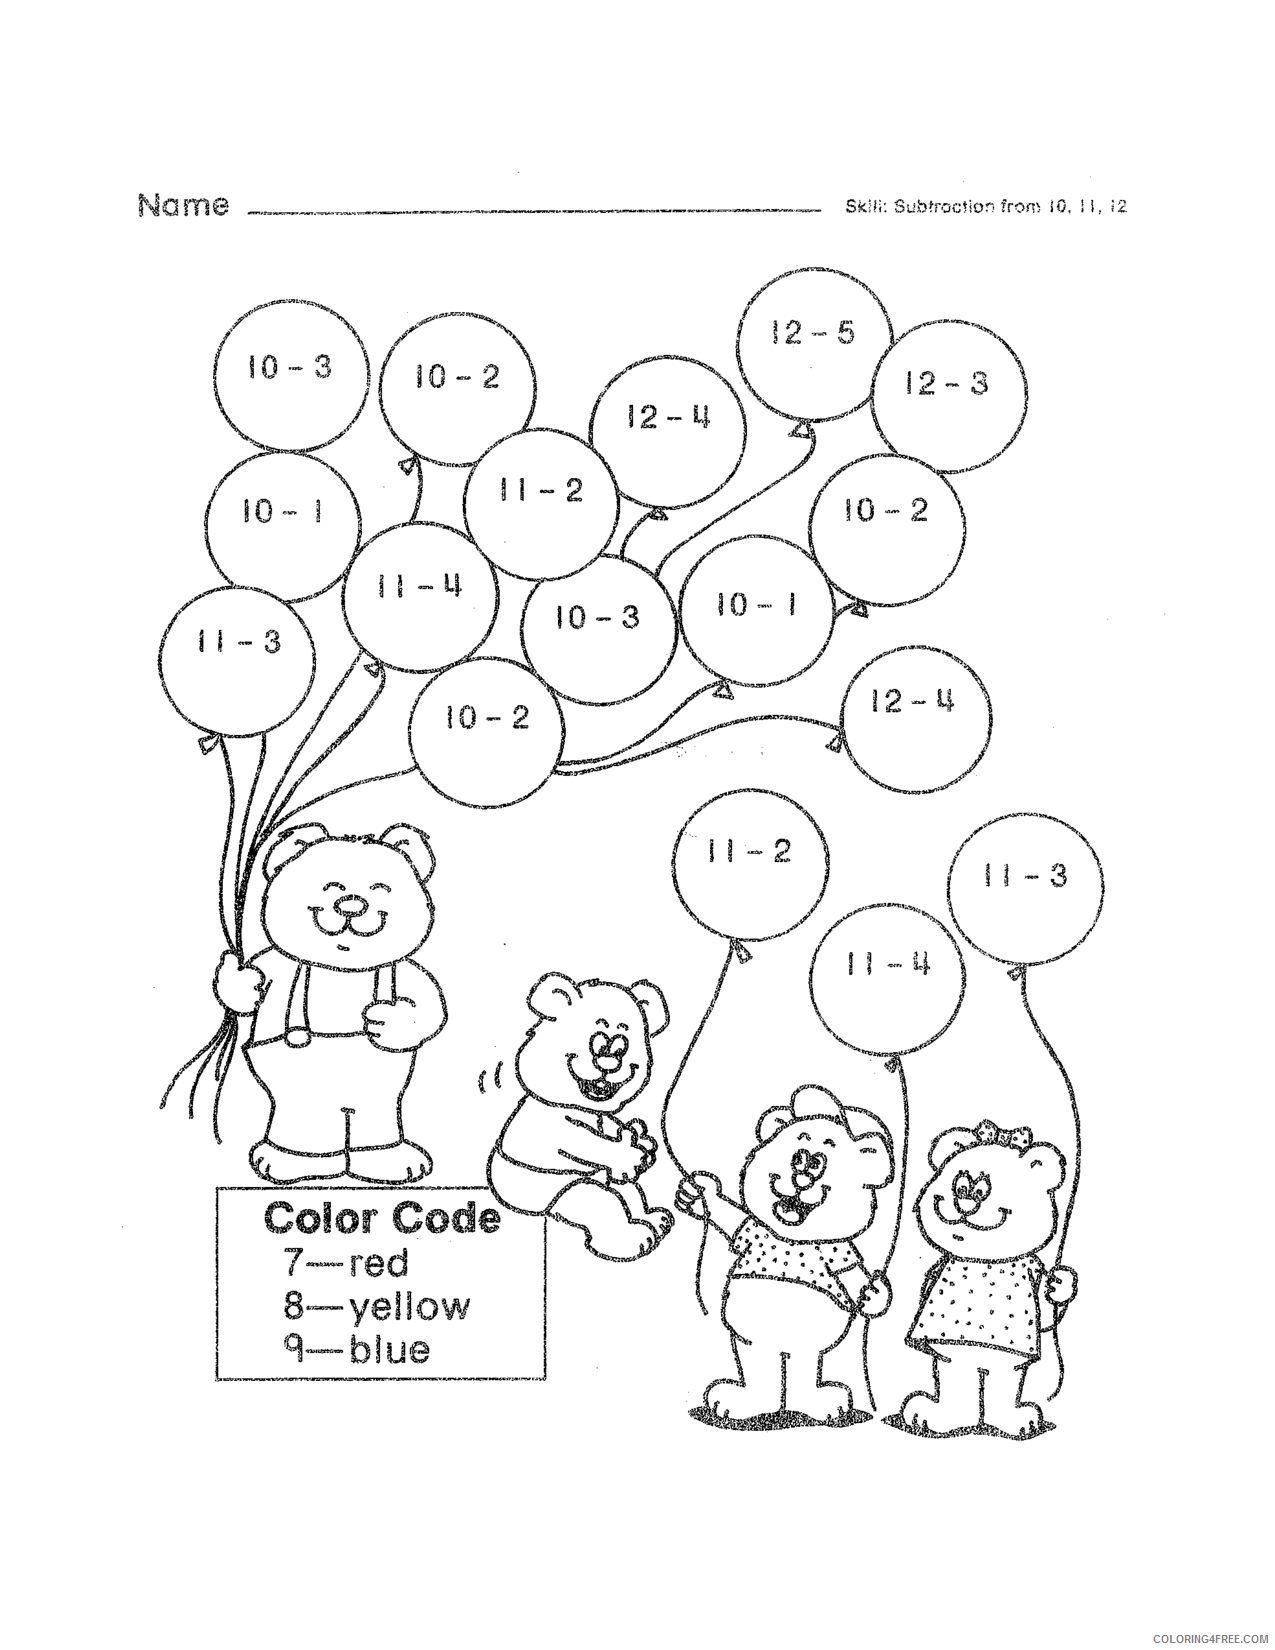 2nd Grade Coloring Pages Educational Color by Subtraction Worksheet 2020 0228 Coloring4free